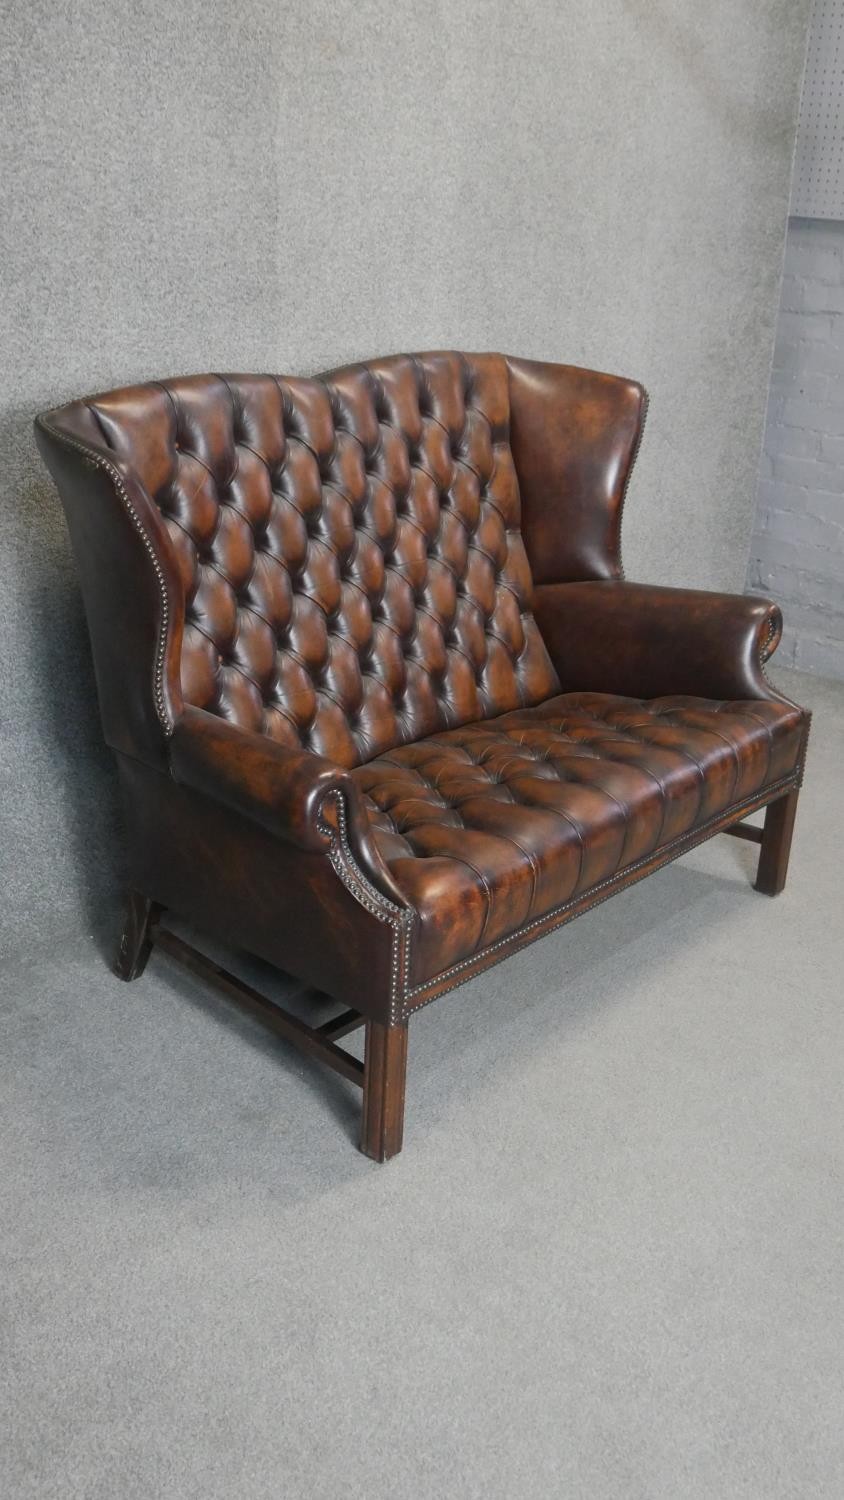 A Georgian style wingback two seater armchair in deep buttoned and studded leather upholstery on - Image 2 of 5